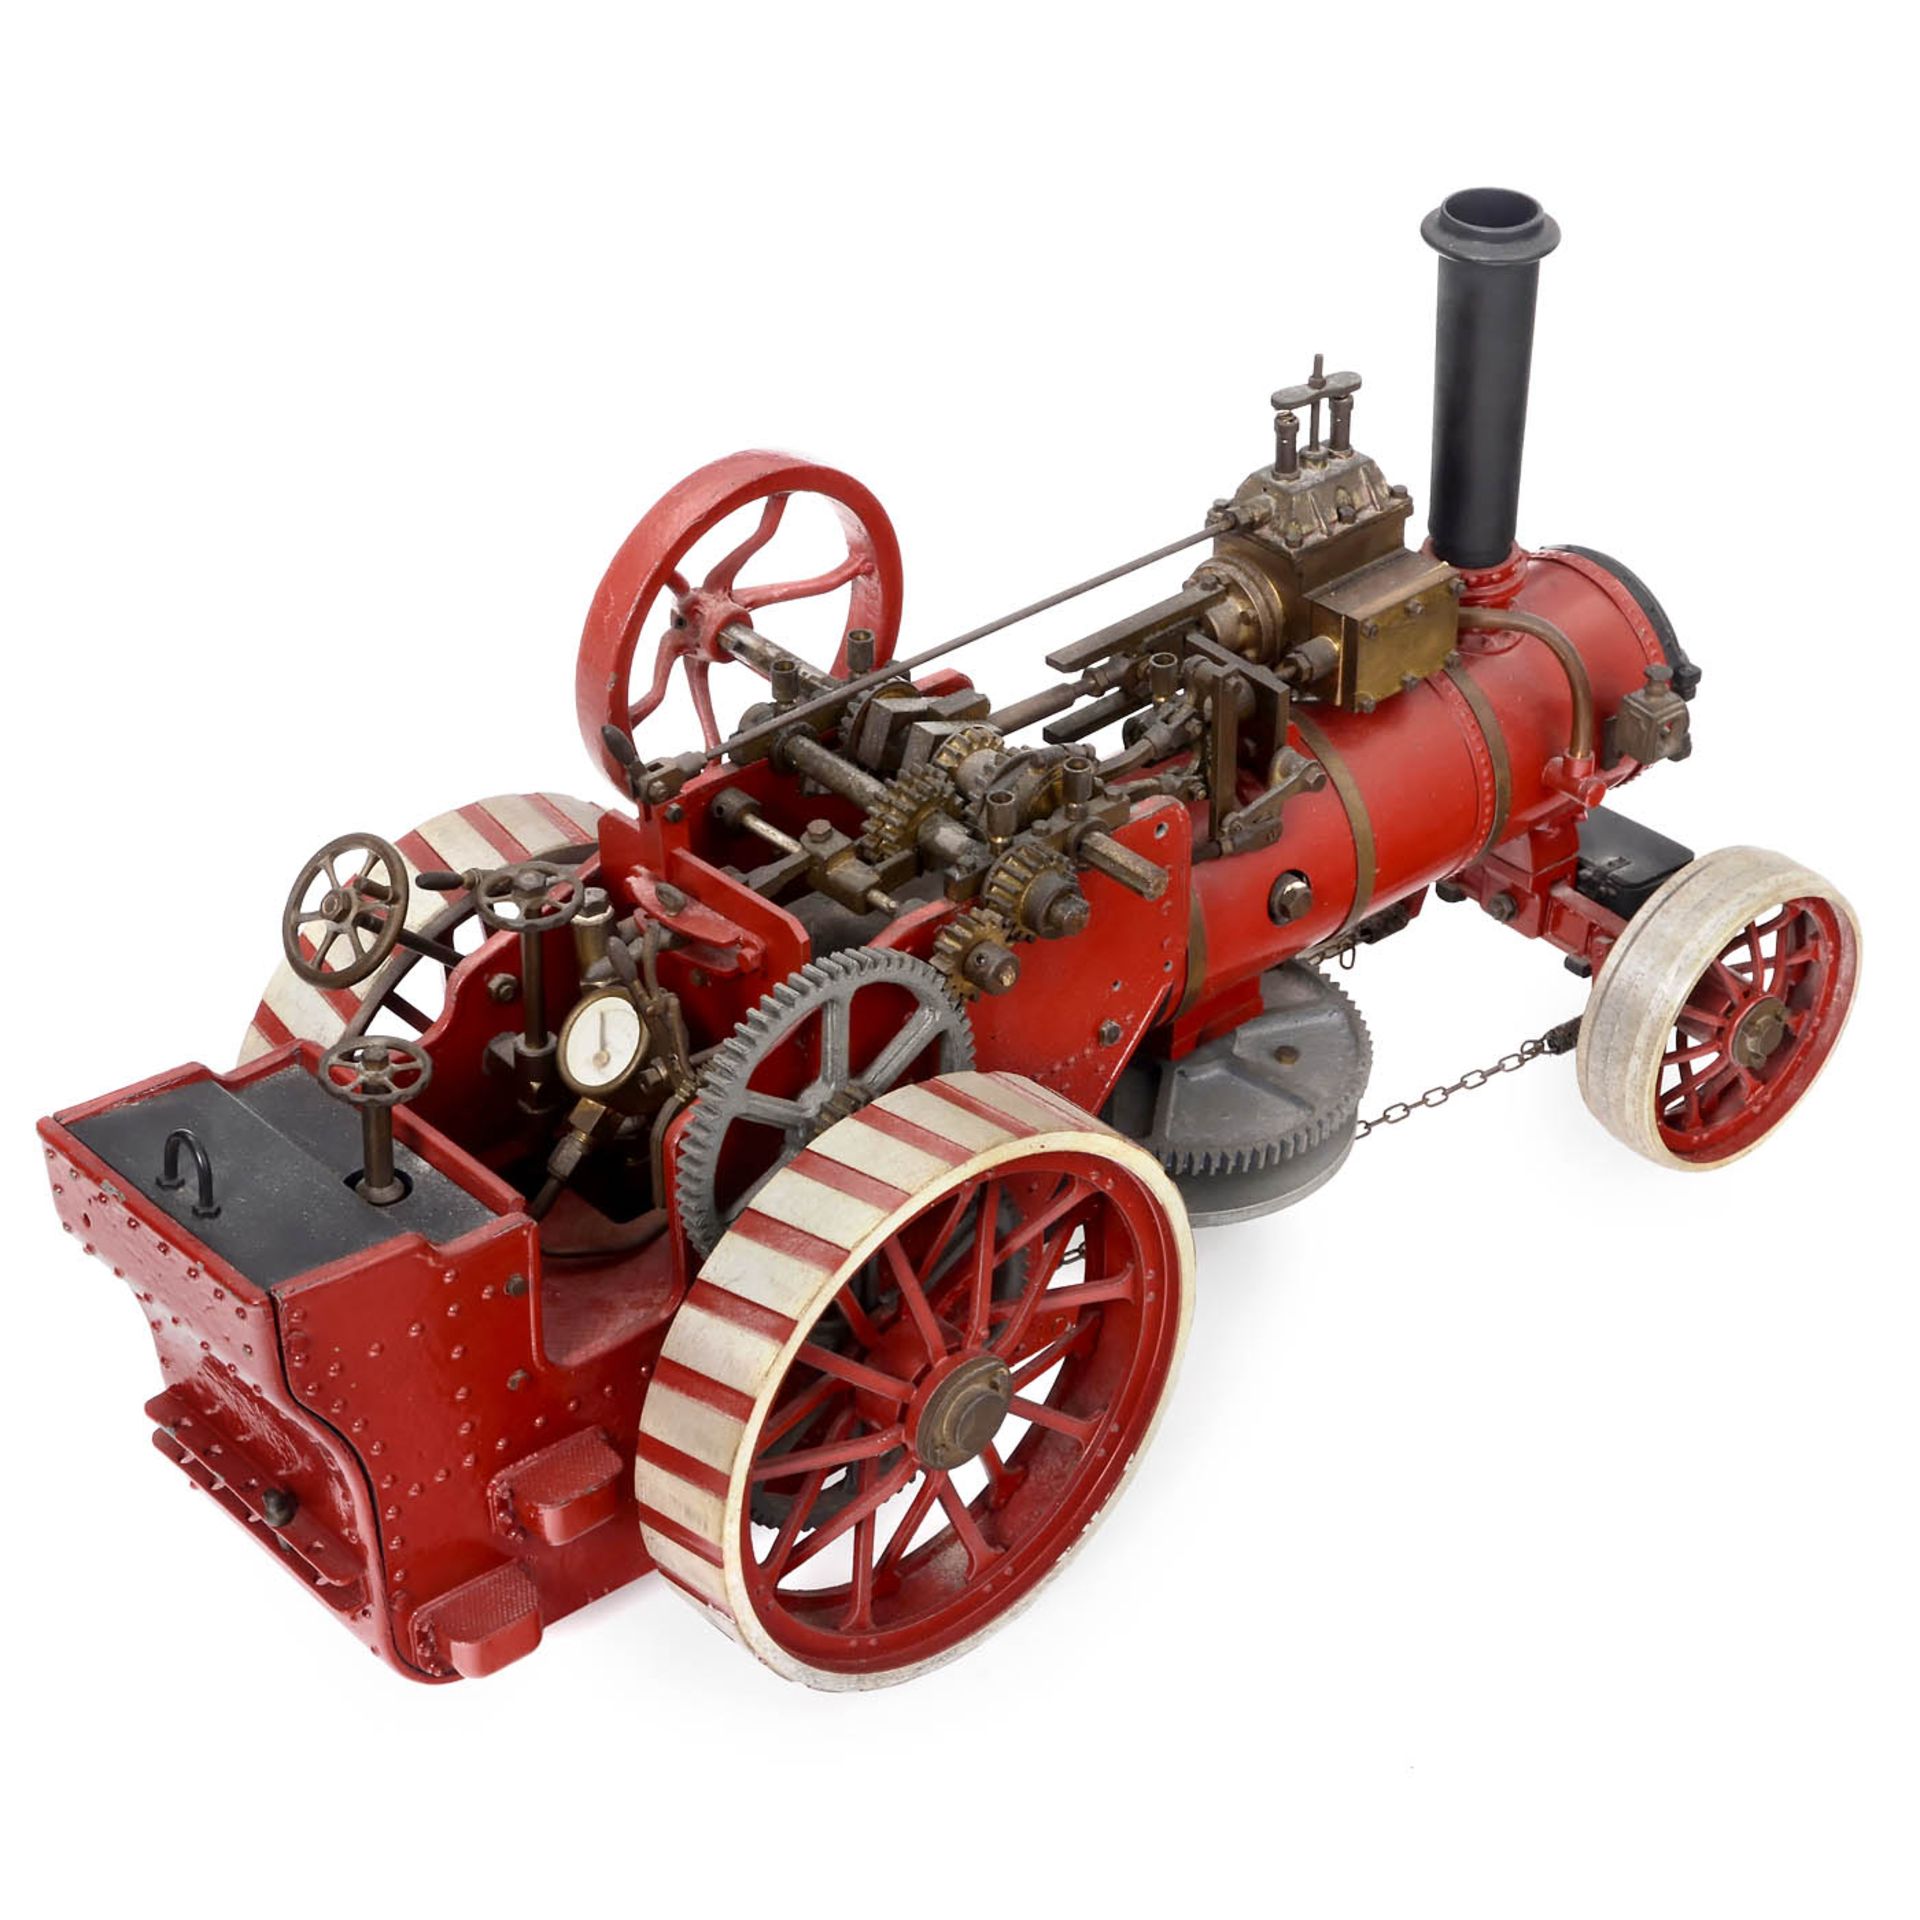 ¾-Inch Scale Model of the Live-Steam Traction Engine "Napoleon" by Fowler, c. 1975 - Bild 2 aus 2